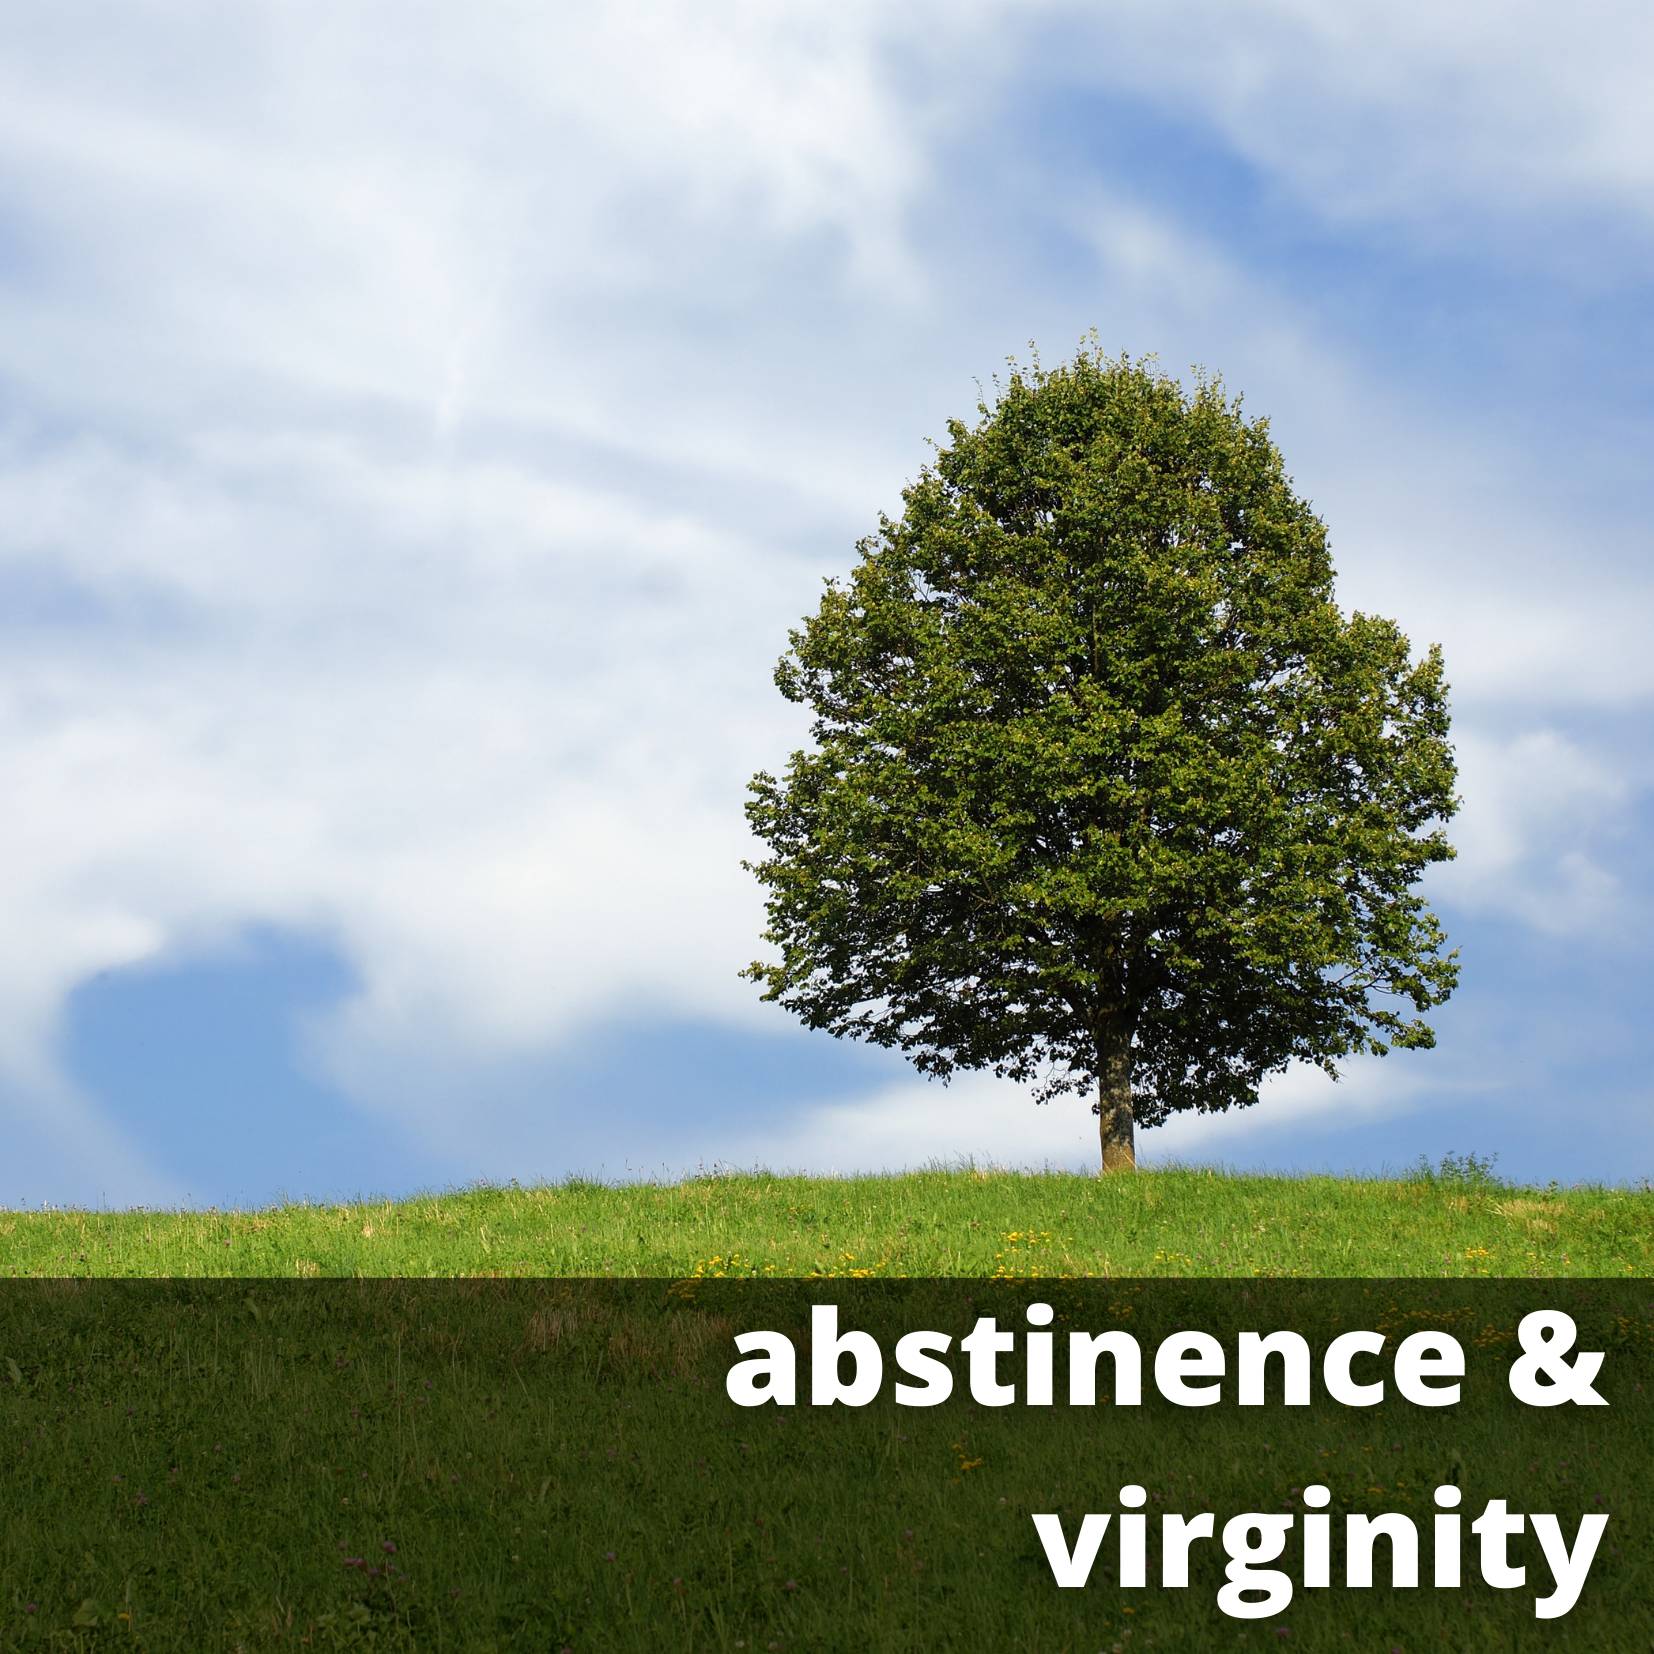 abstinence and virginity